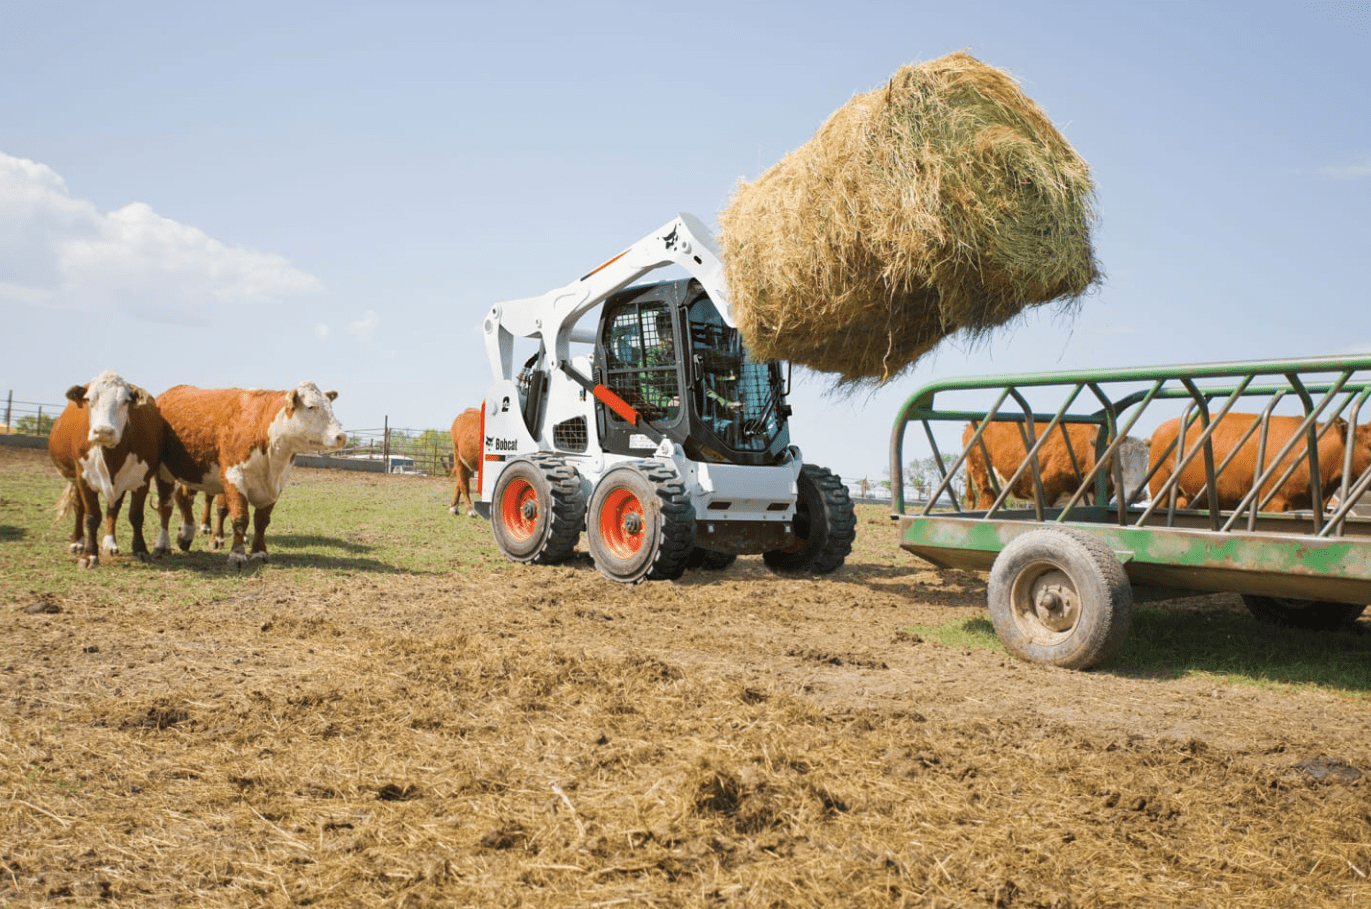 Browse Specs and more for the Bobcat S770 Skid-Steer Loader - Bobcat of Indy